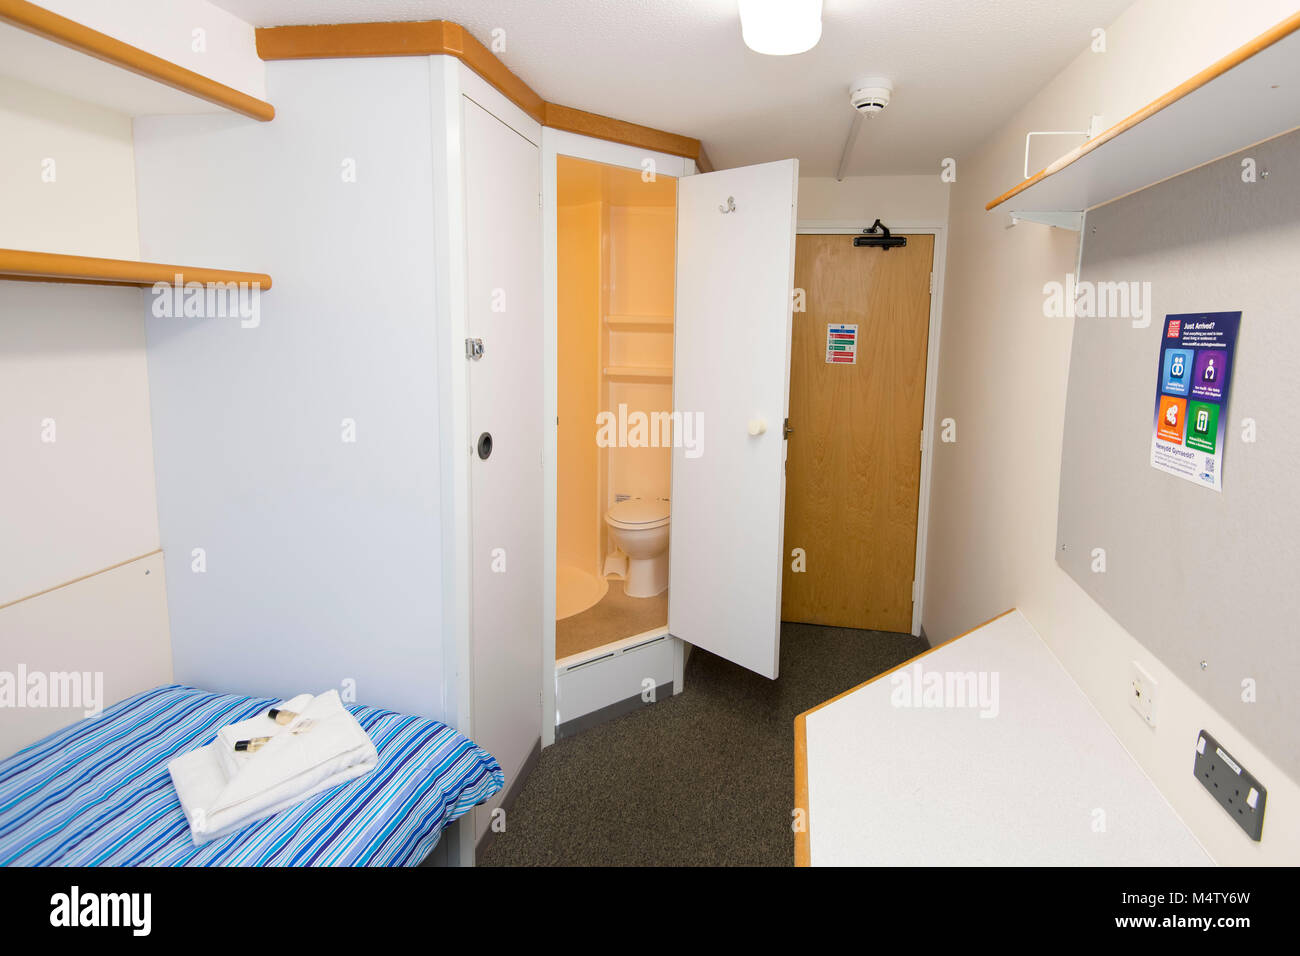 Small bedroom and study student accommodation area in university halls. Stock Photo